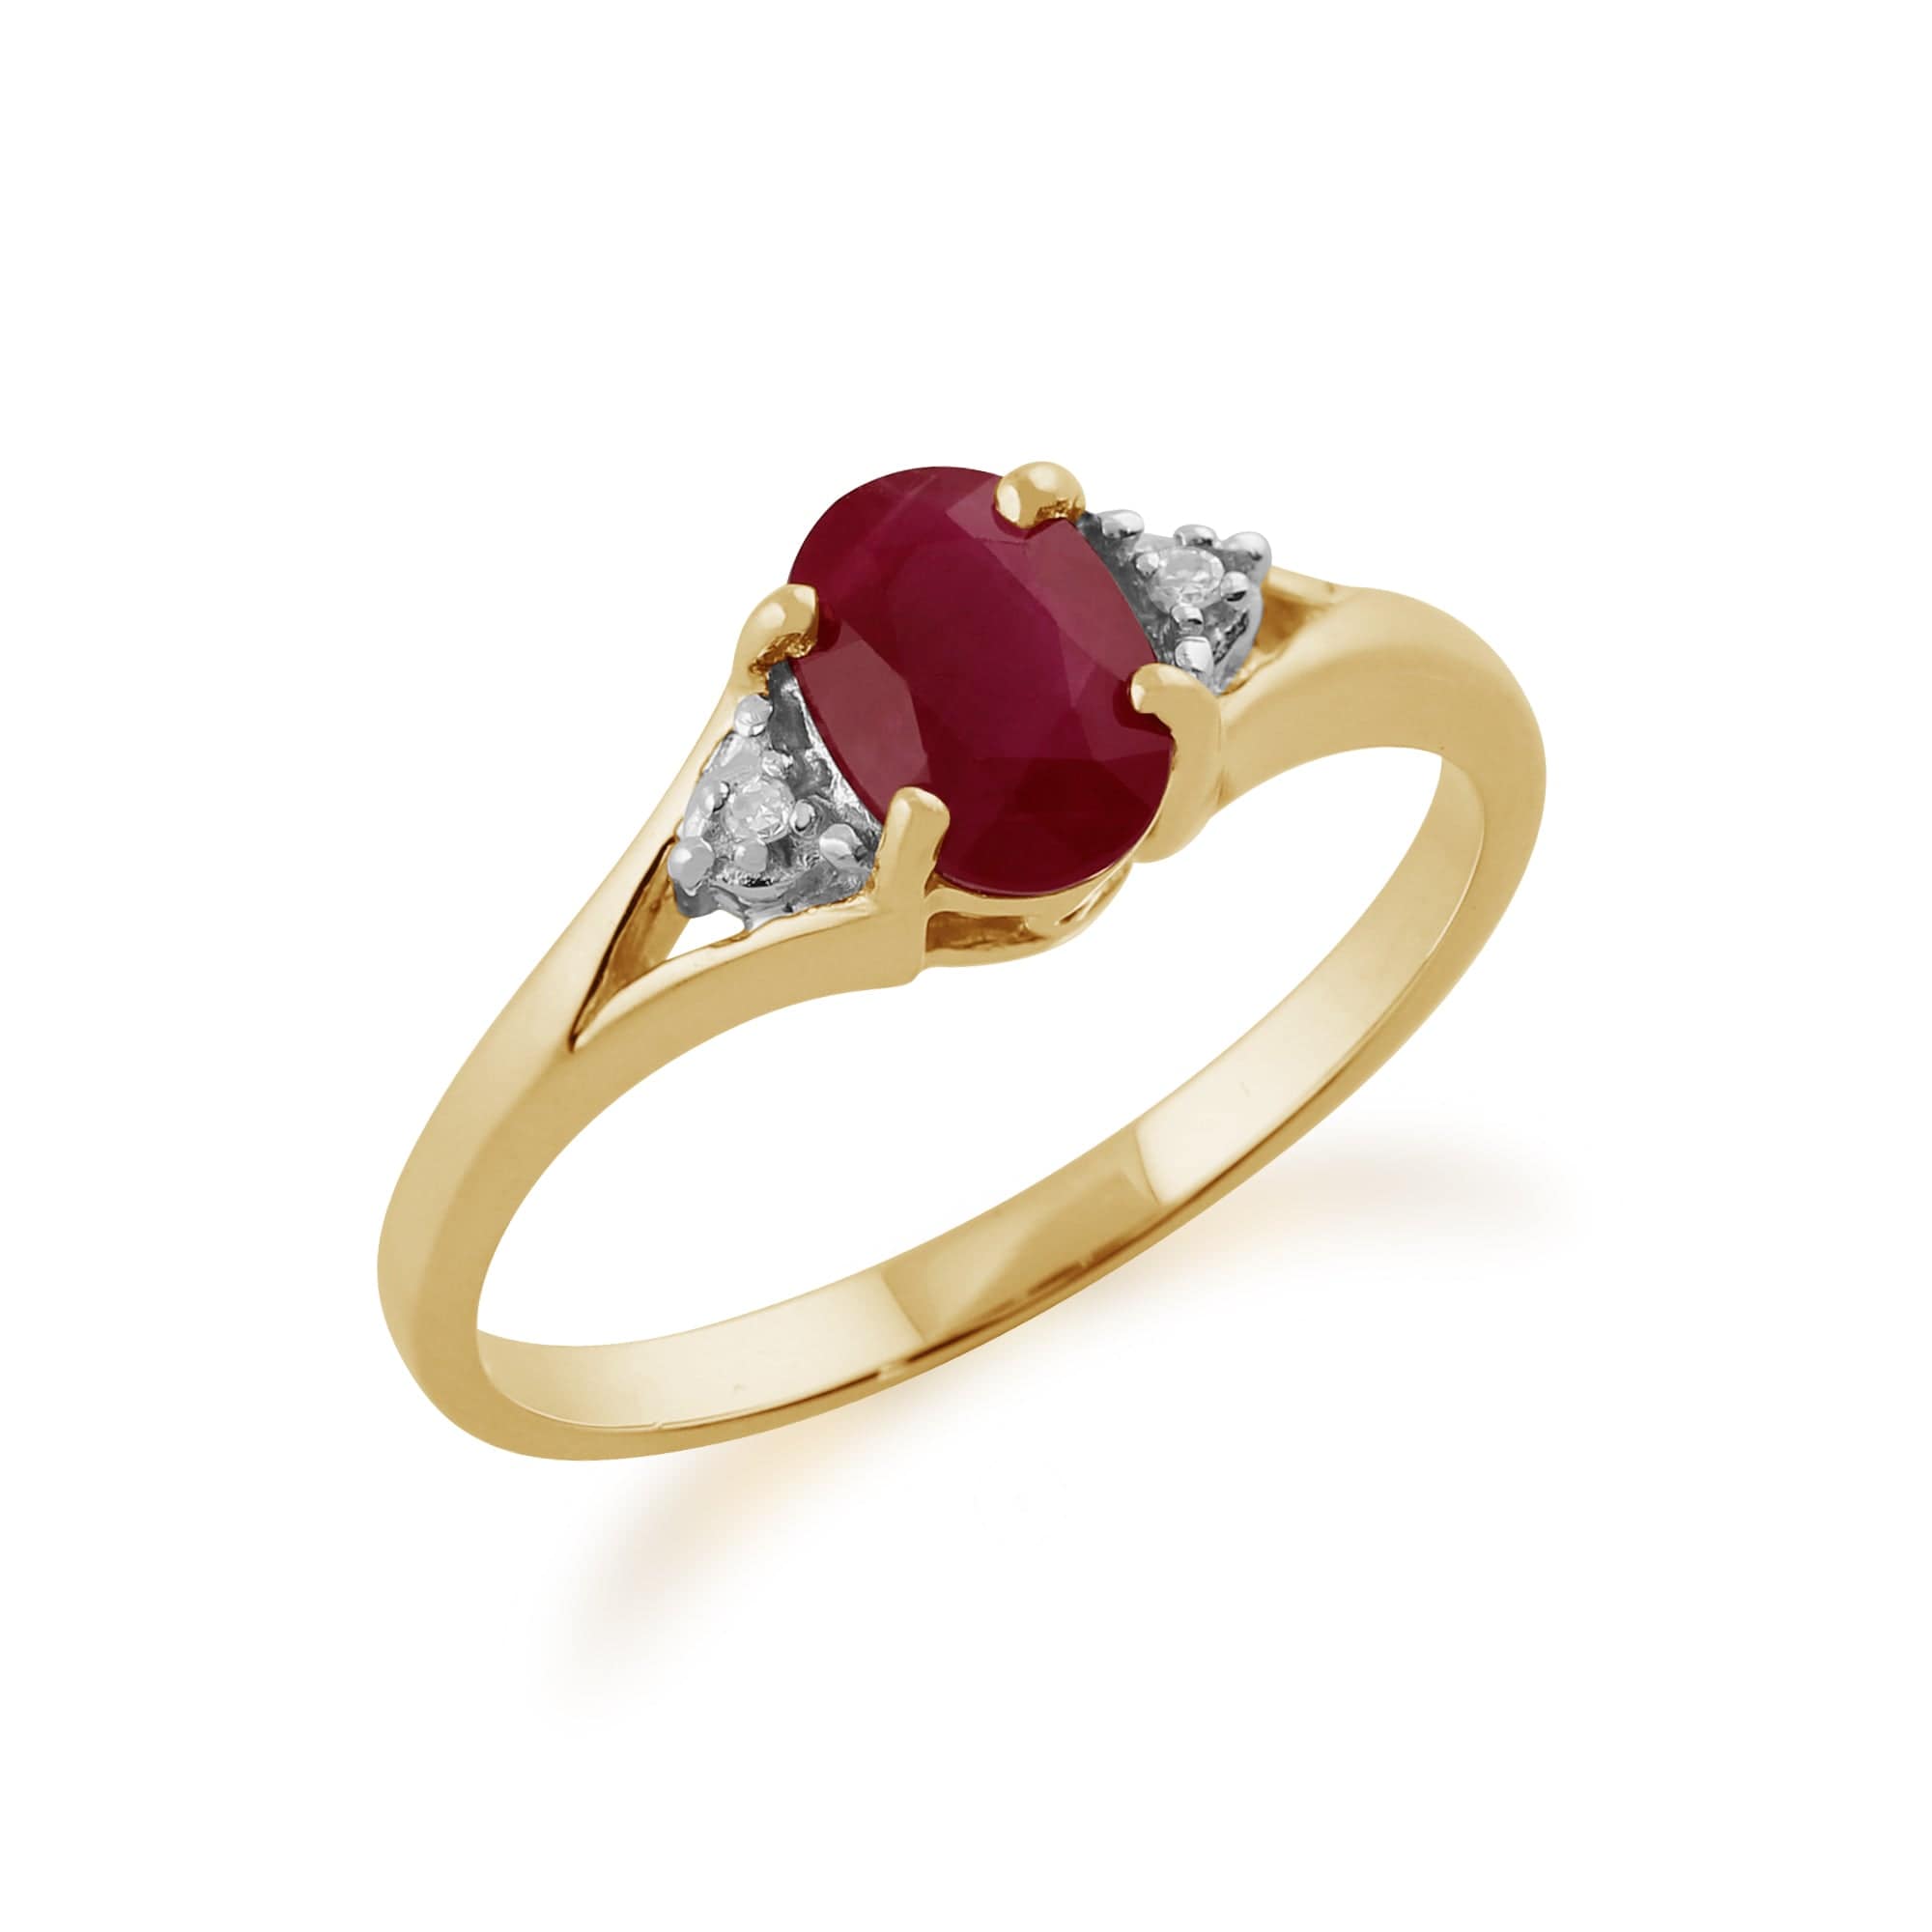 25459 Classic Oval Ruby & Diamond Ring in 9ct Yellow Gold 2